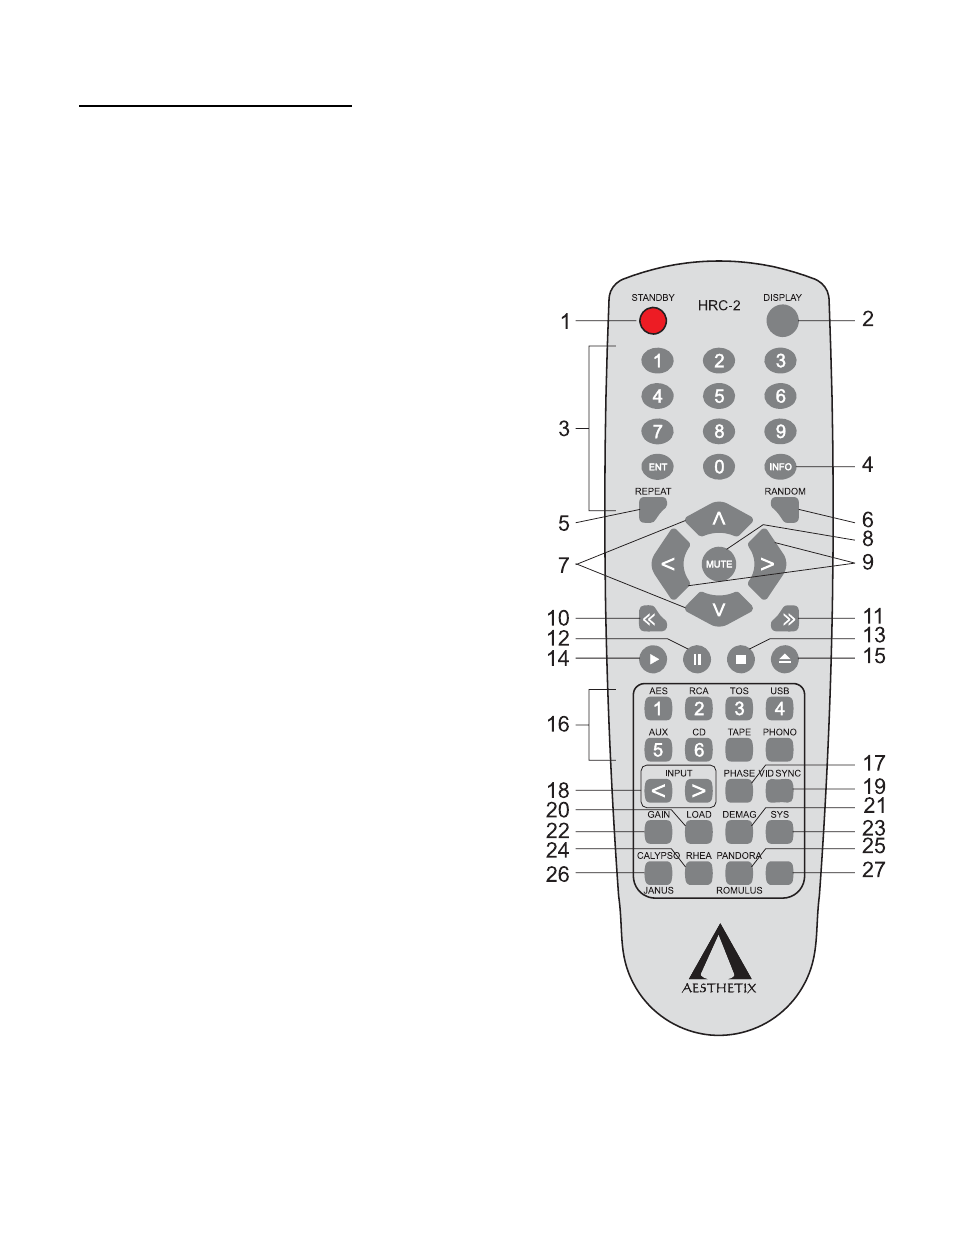 The hand held remote, Figure 1 – hand held remote hrc-2 | Aesthetix Pandora  User Manual | Page 7 / 19